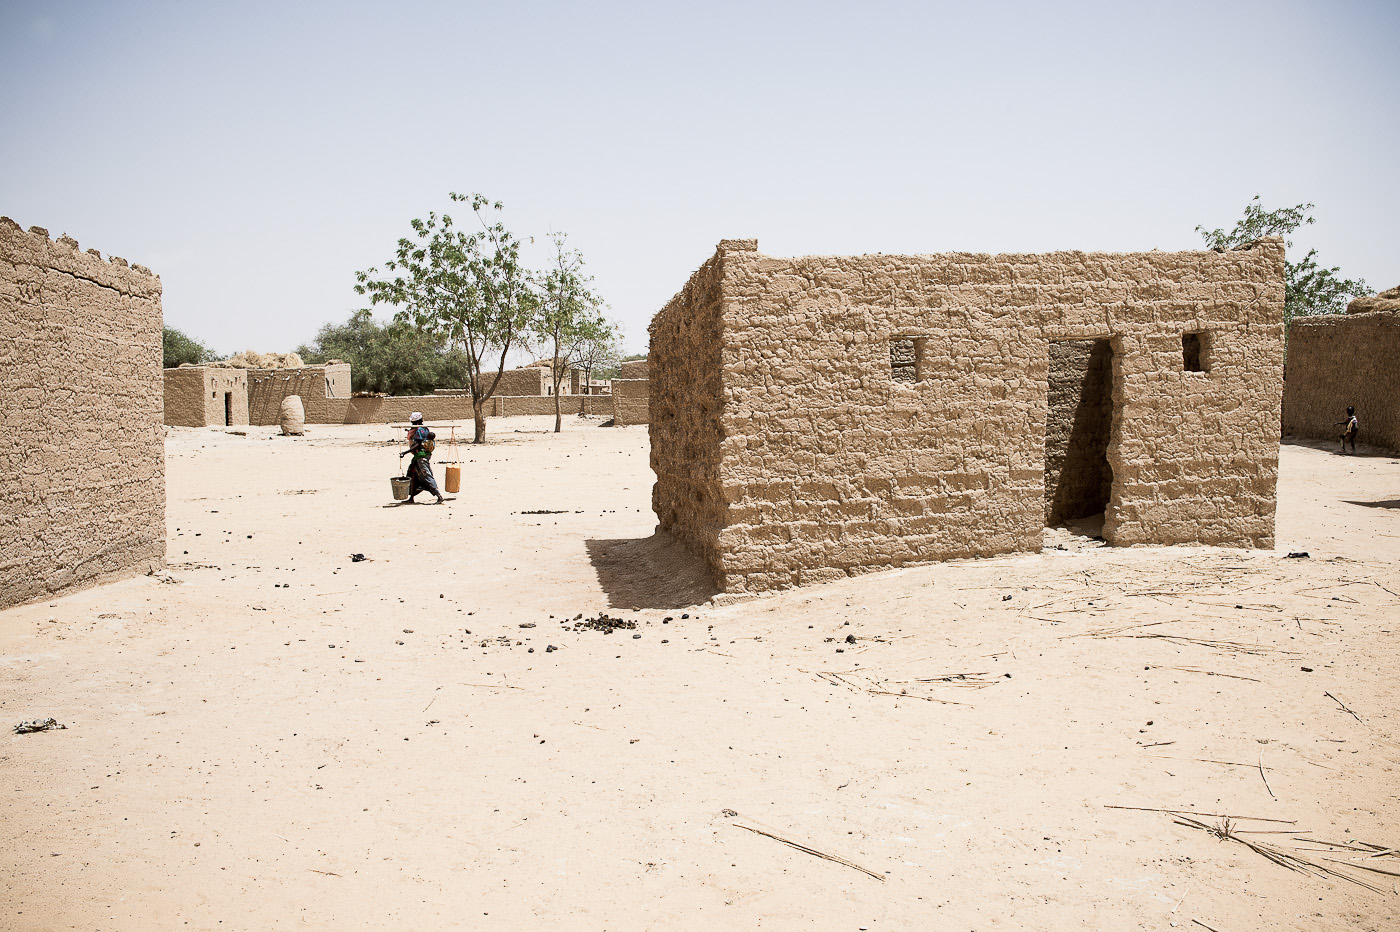 houses in niger